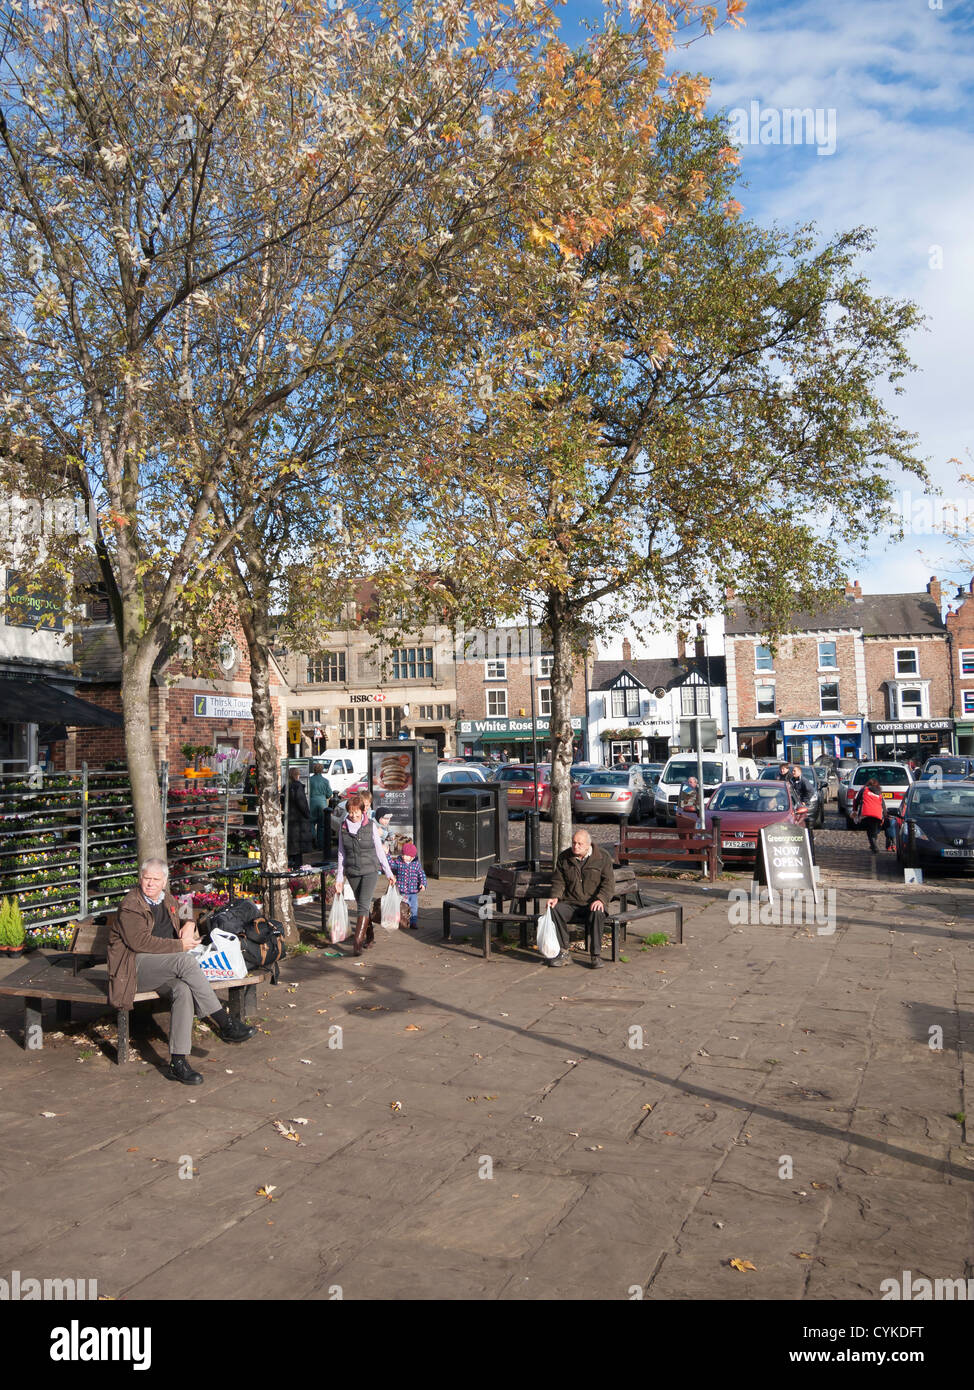 The Market Place in Thirsk town centre North Yorkshire UK on a sunny autumn day Stock Photo